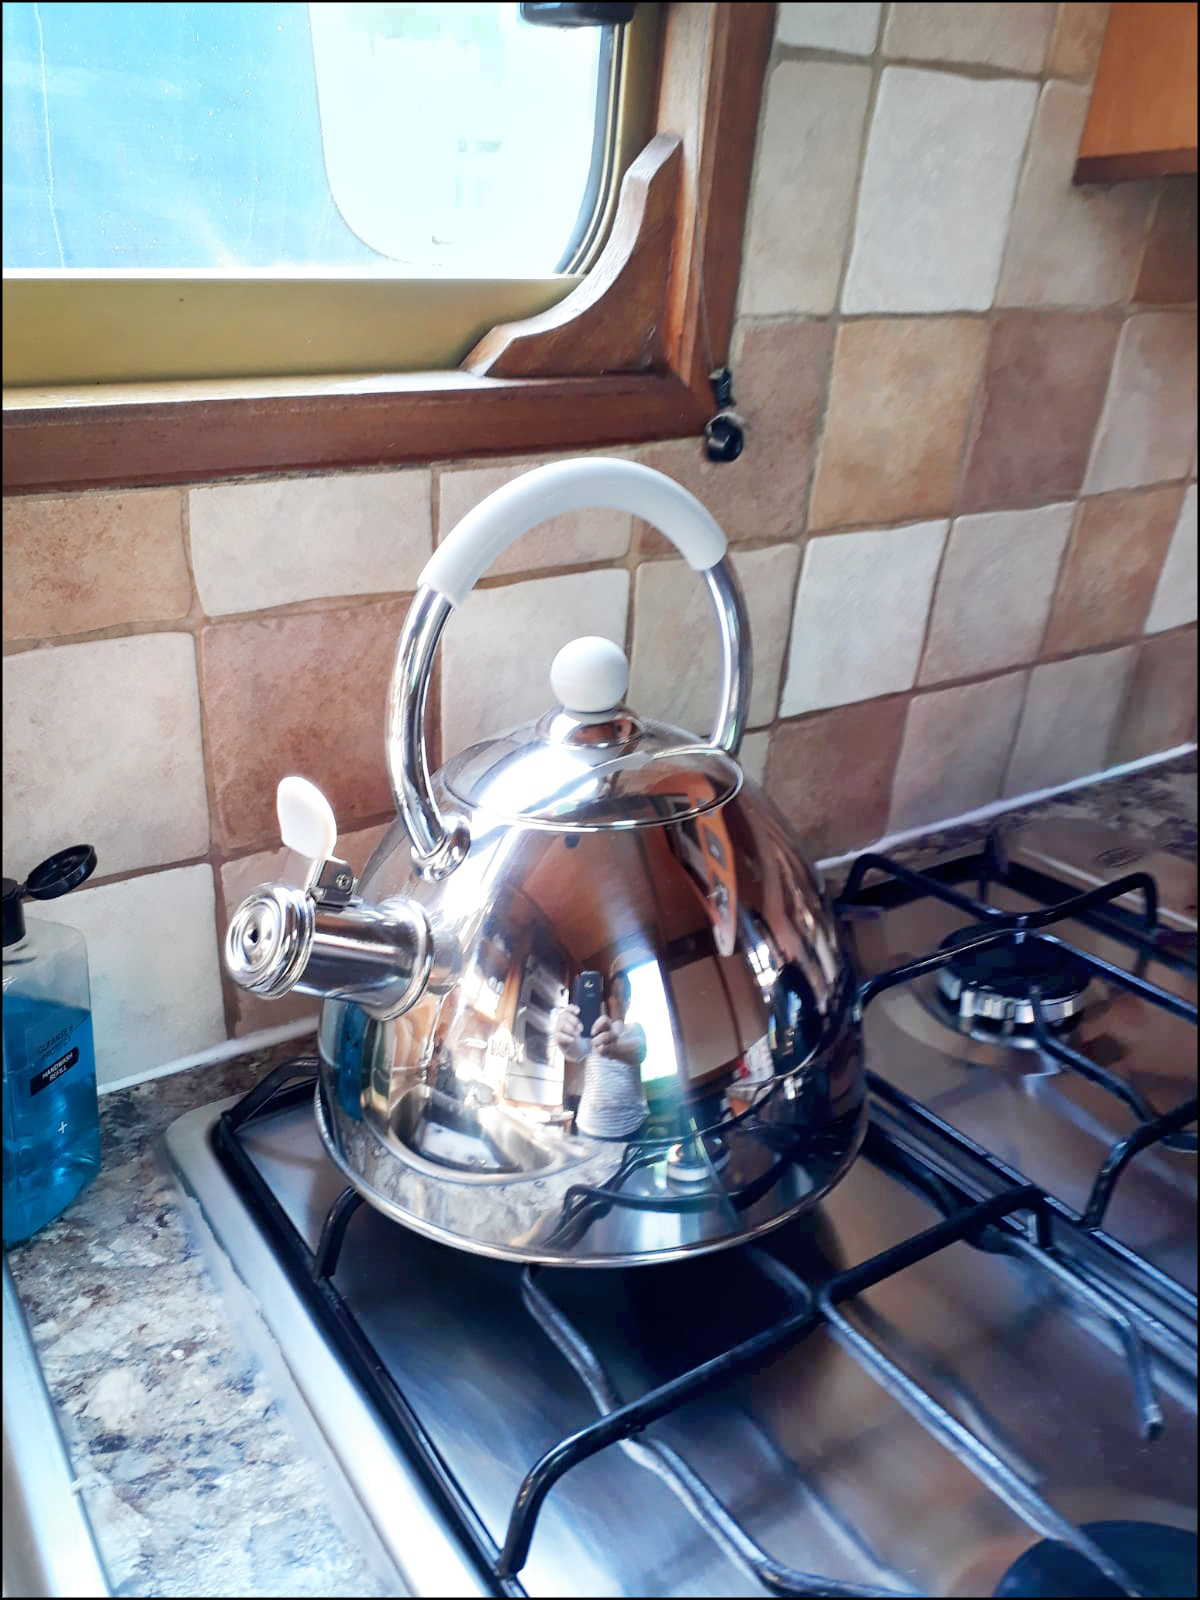 A photograph of a kettle on hob